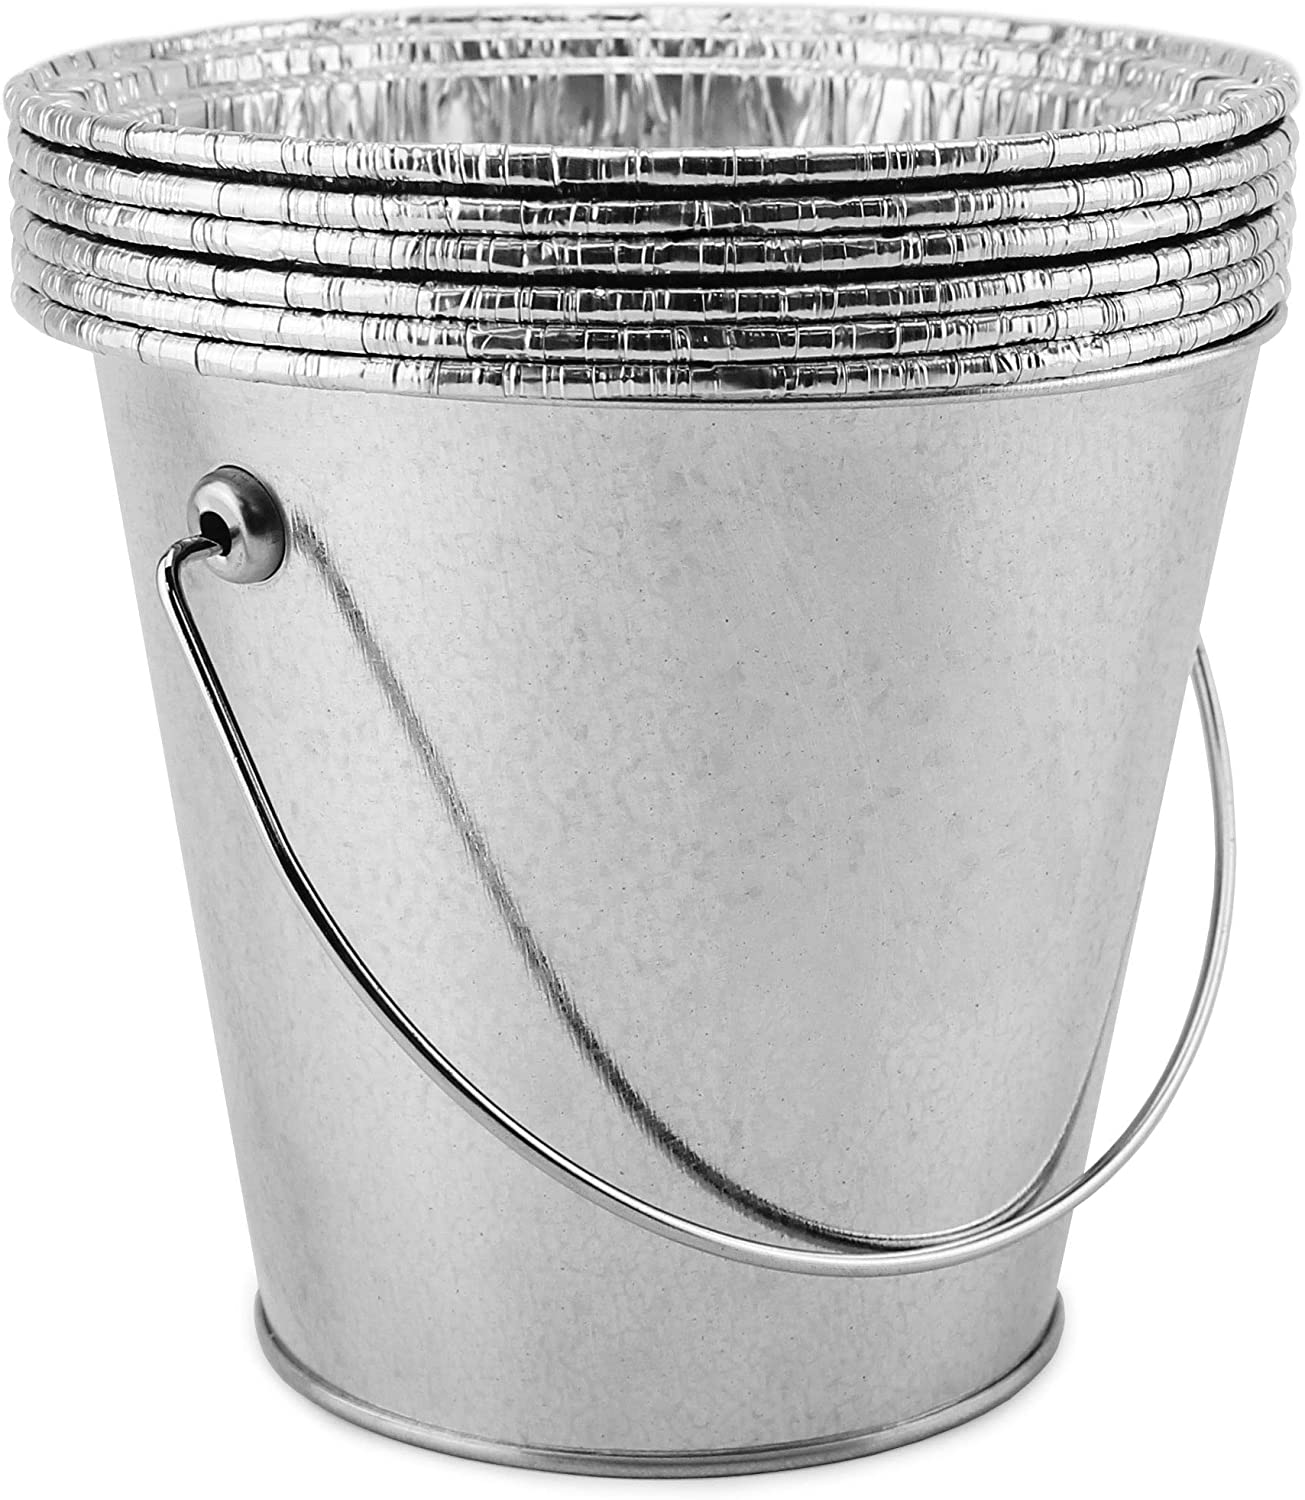 Grill Grease Bucket with Liners (Case of 27 Sets) - SH_1526_CASE